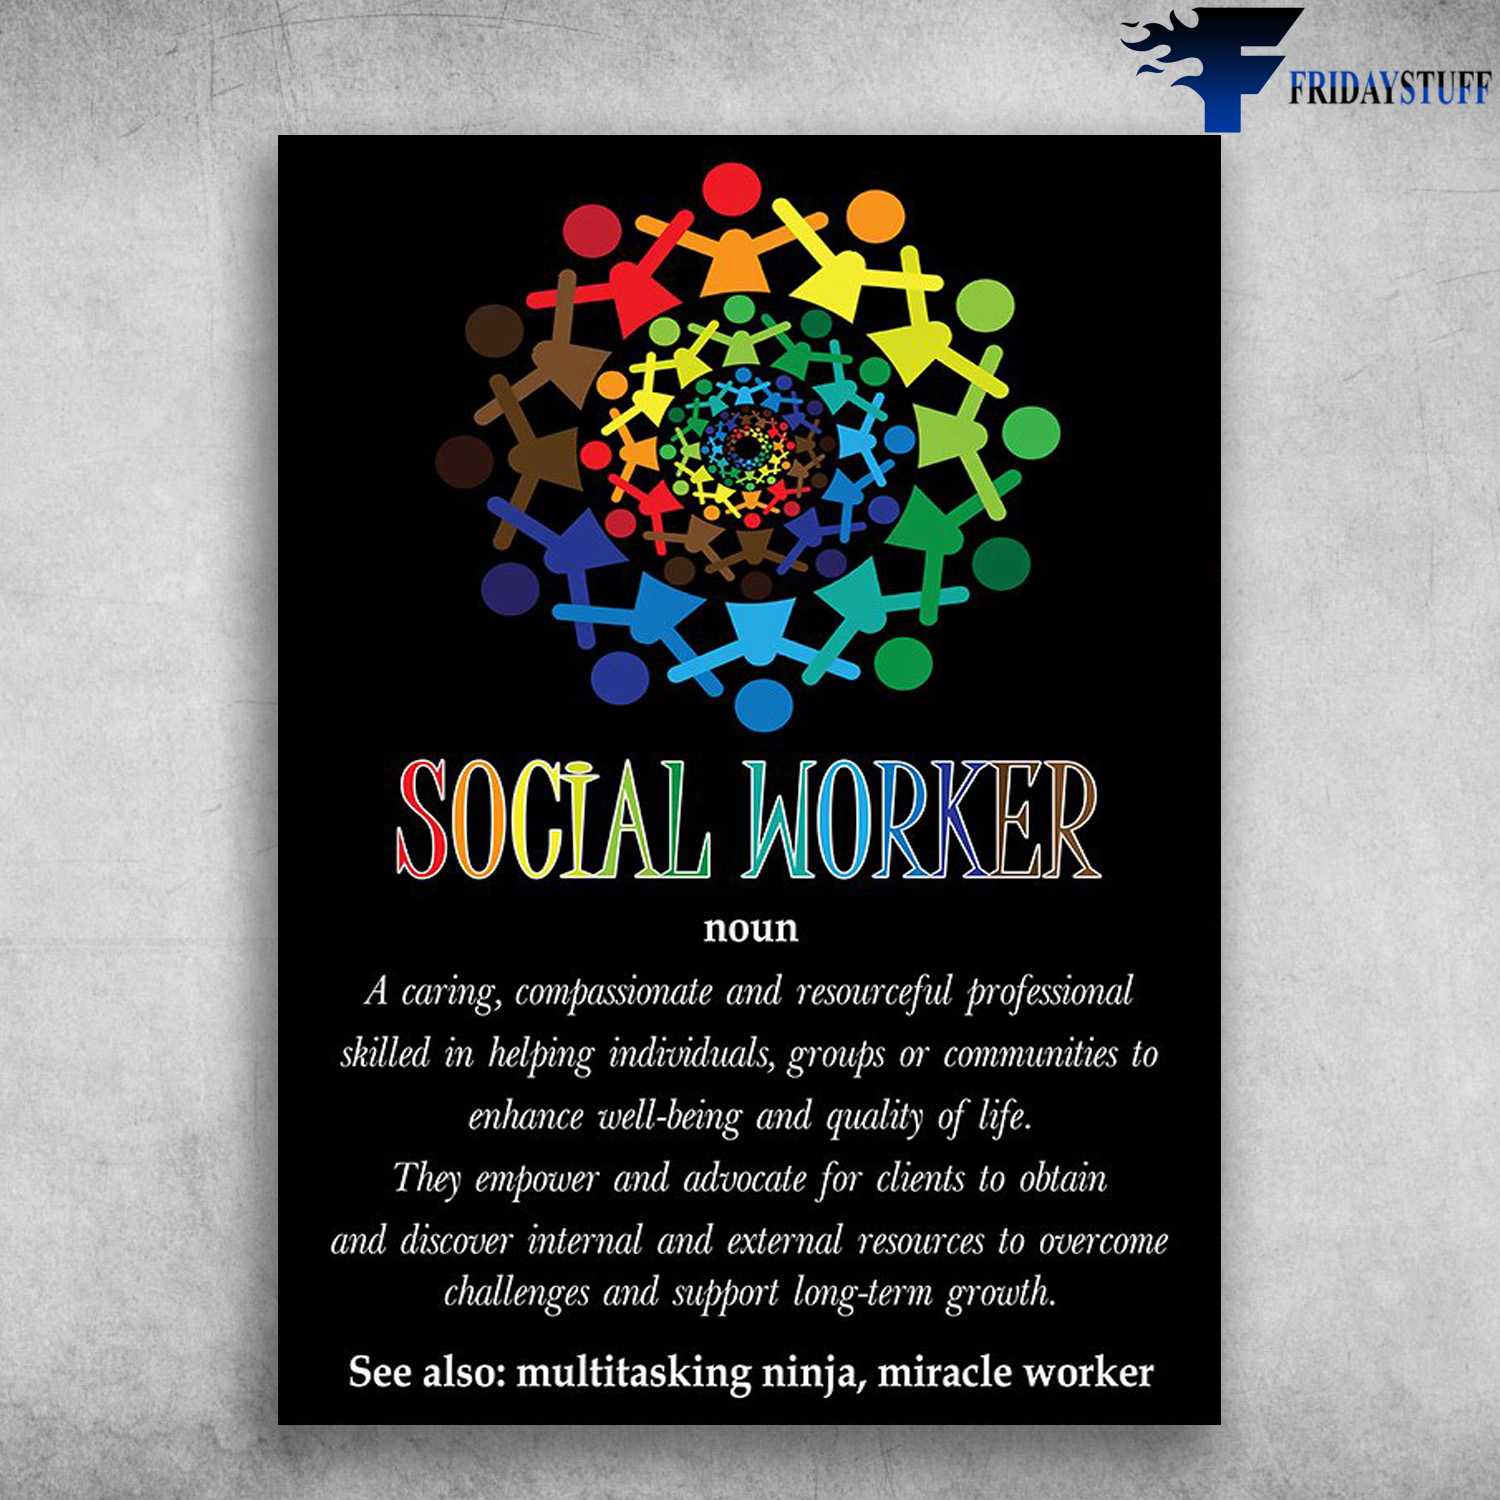 Social Worker - A Caring, Compassionate And Resourceful Professional, Skilled In Helping Individuals, Groups Or Communities, To Enhance Well-being And Quality Of Life